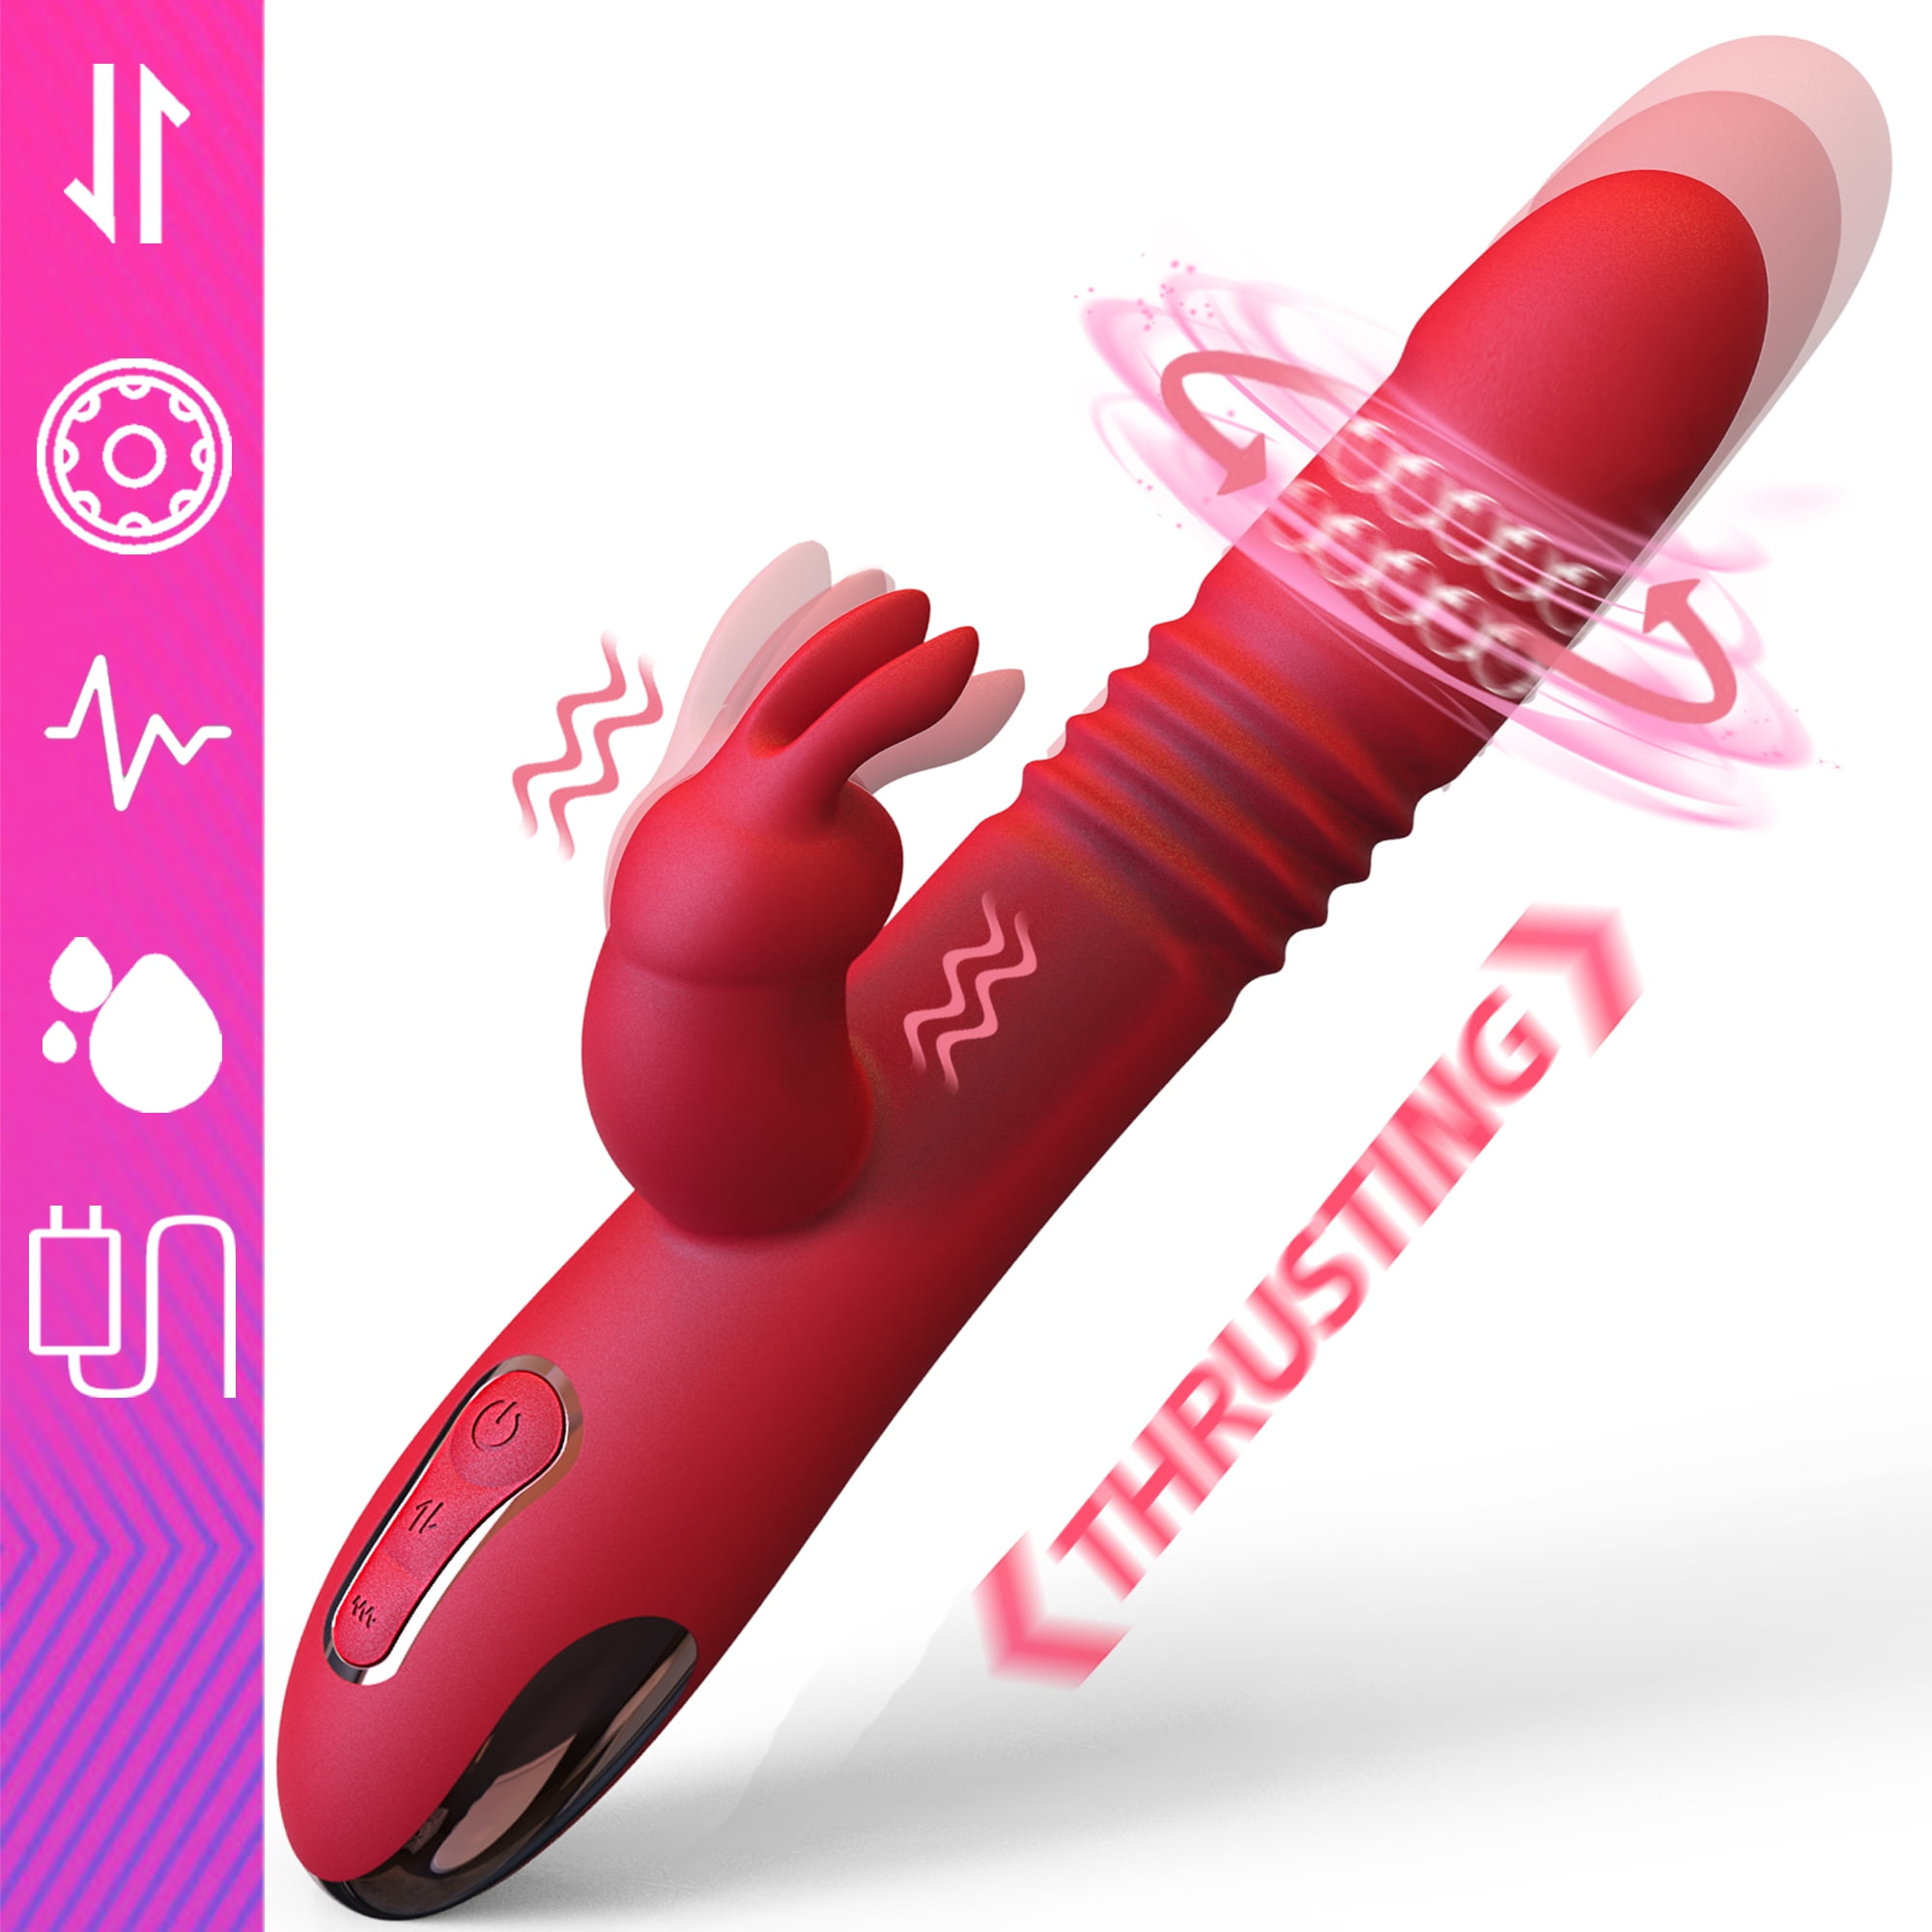 Erifxes Sex Toys Thrusting Rabbit Vibrator for Women, Rotating Sex Toy with Beads,Triple Stimulating Adult Toy, Clitoral G-spot Stimulator Massager for Women Pleasure Couples Sexual Games image pic